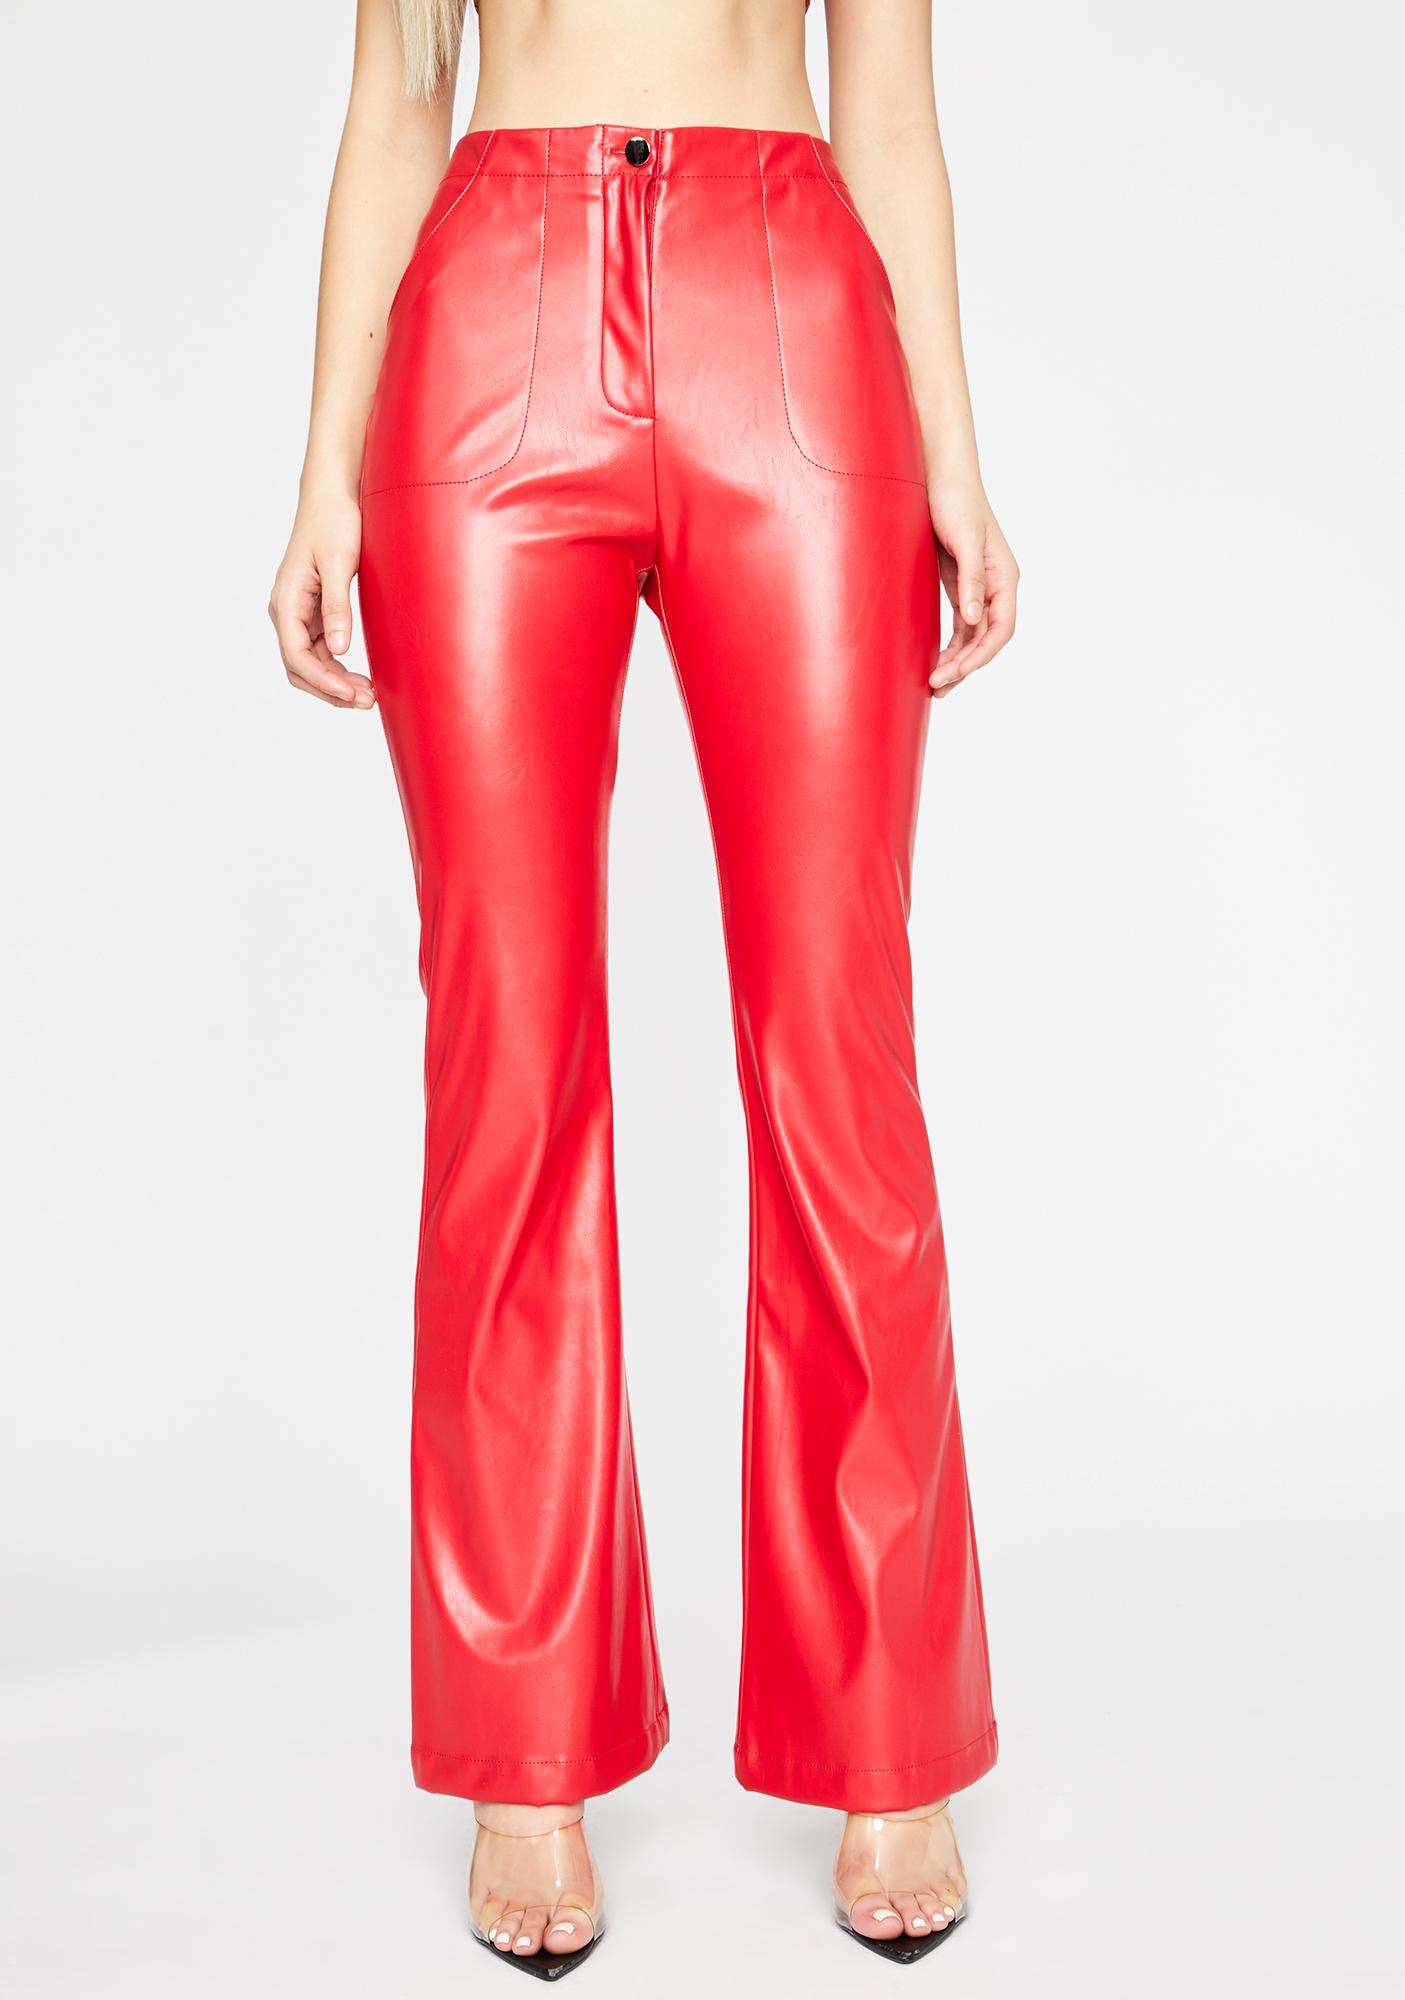 red leather flare pants